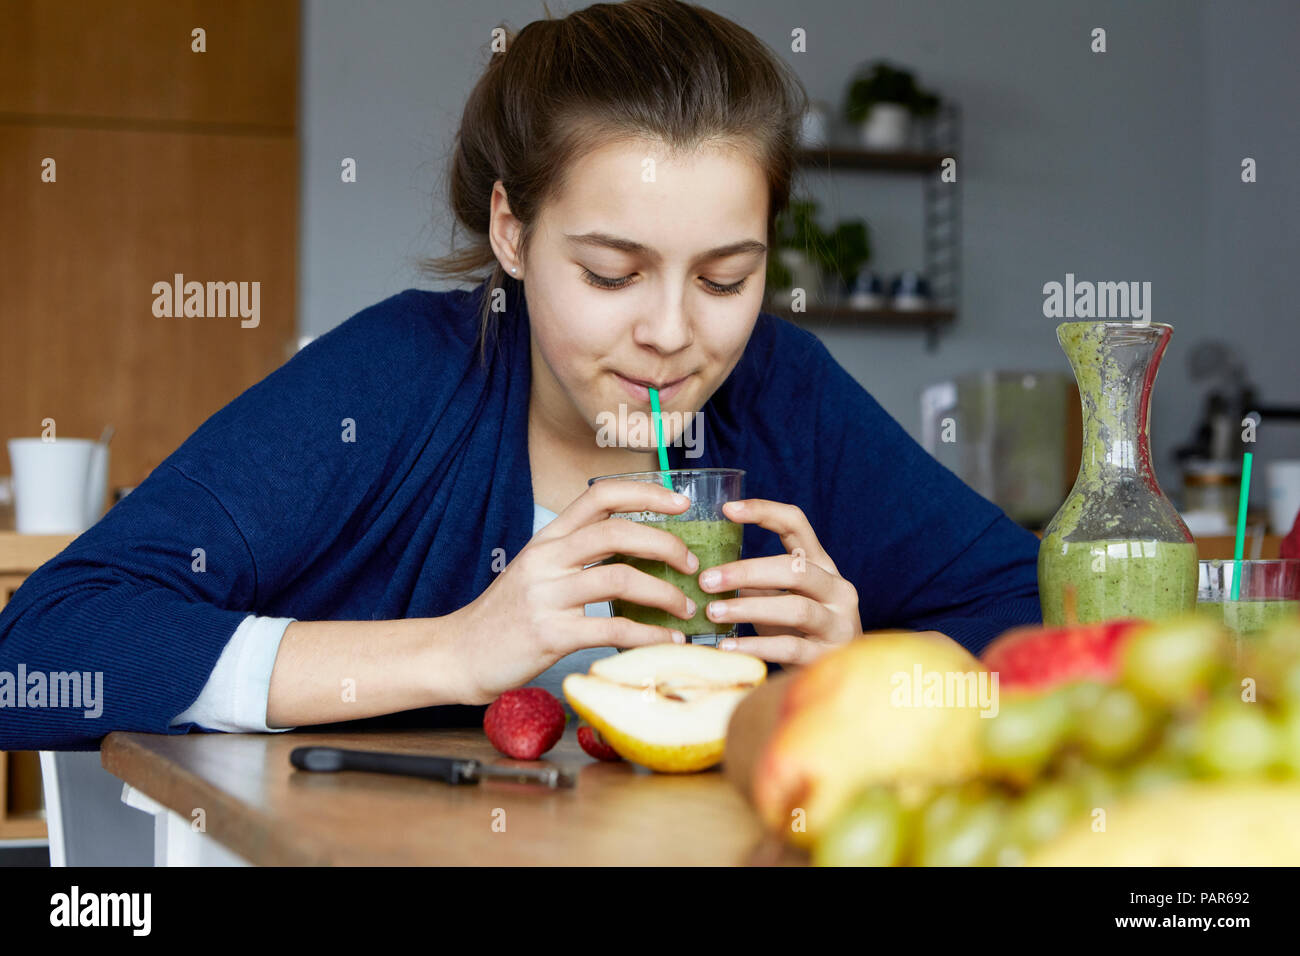 Girl sitting in kitchen, drinking homemade fruit smoothie Stock Photo